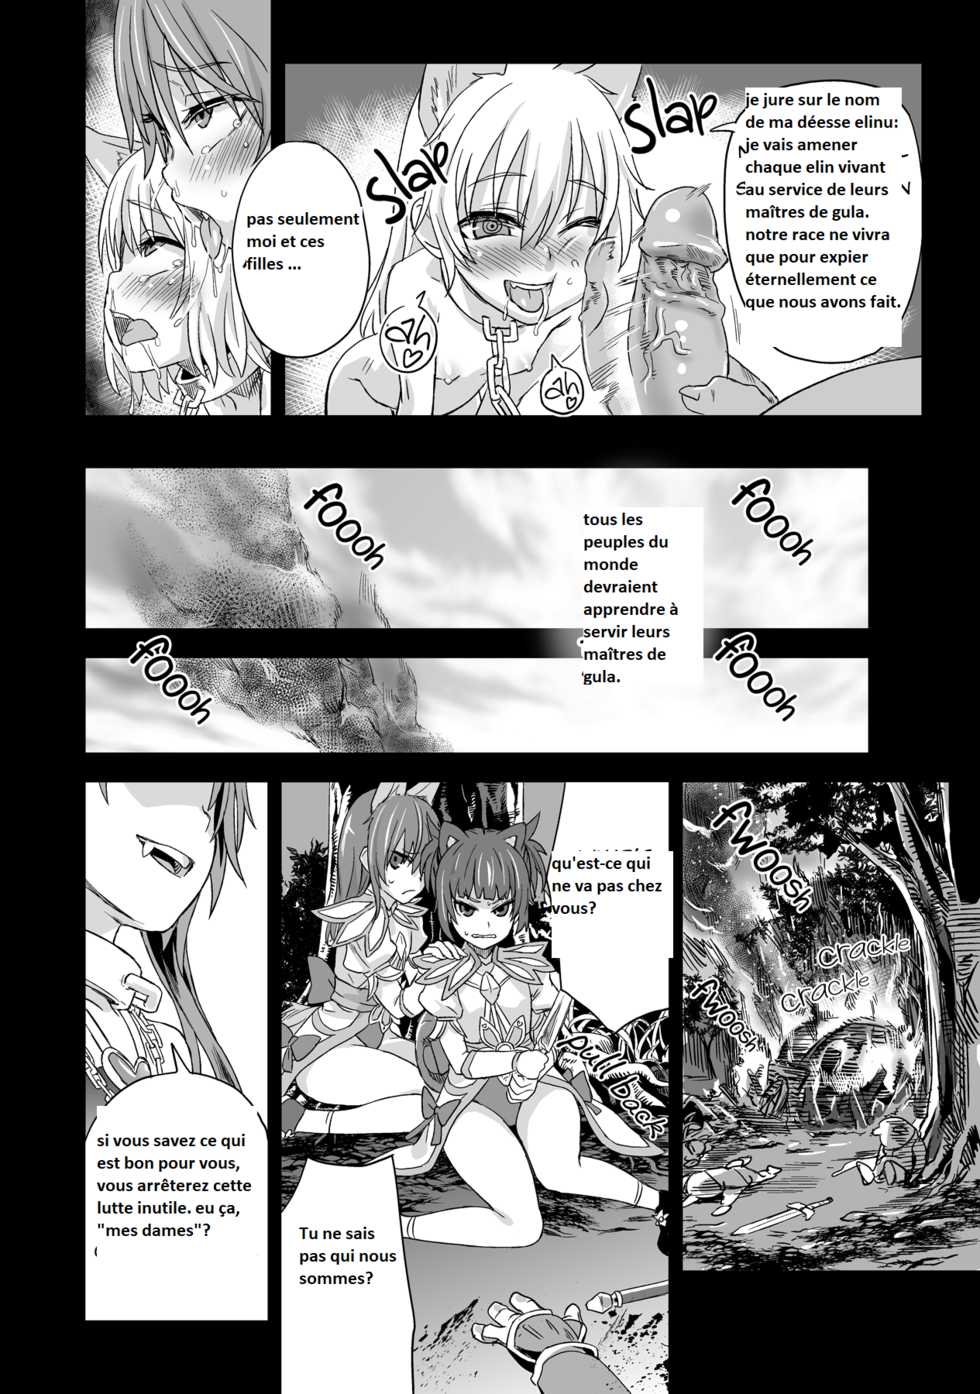 [Fatalpulse (Asanagi)] Victim Girls 12 Another one Bites the Dust (TERA The Exiled Realm of Arborea) [French] [Decensored] [Digital] - Page 25